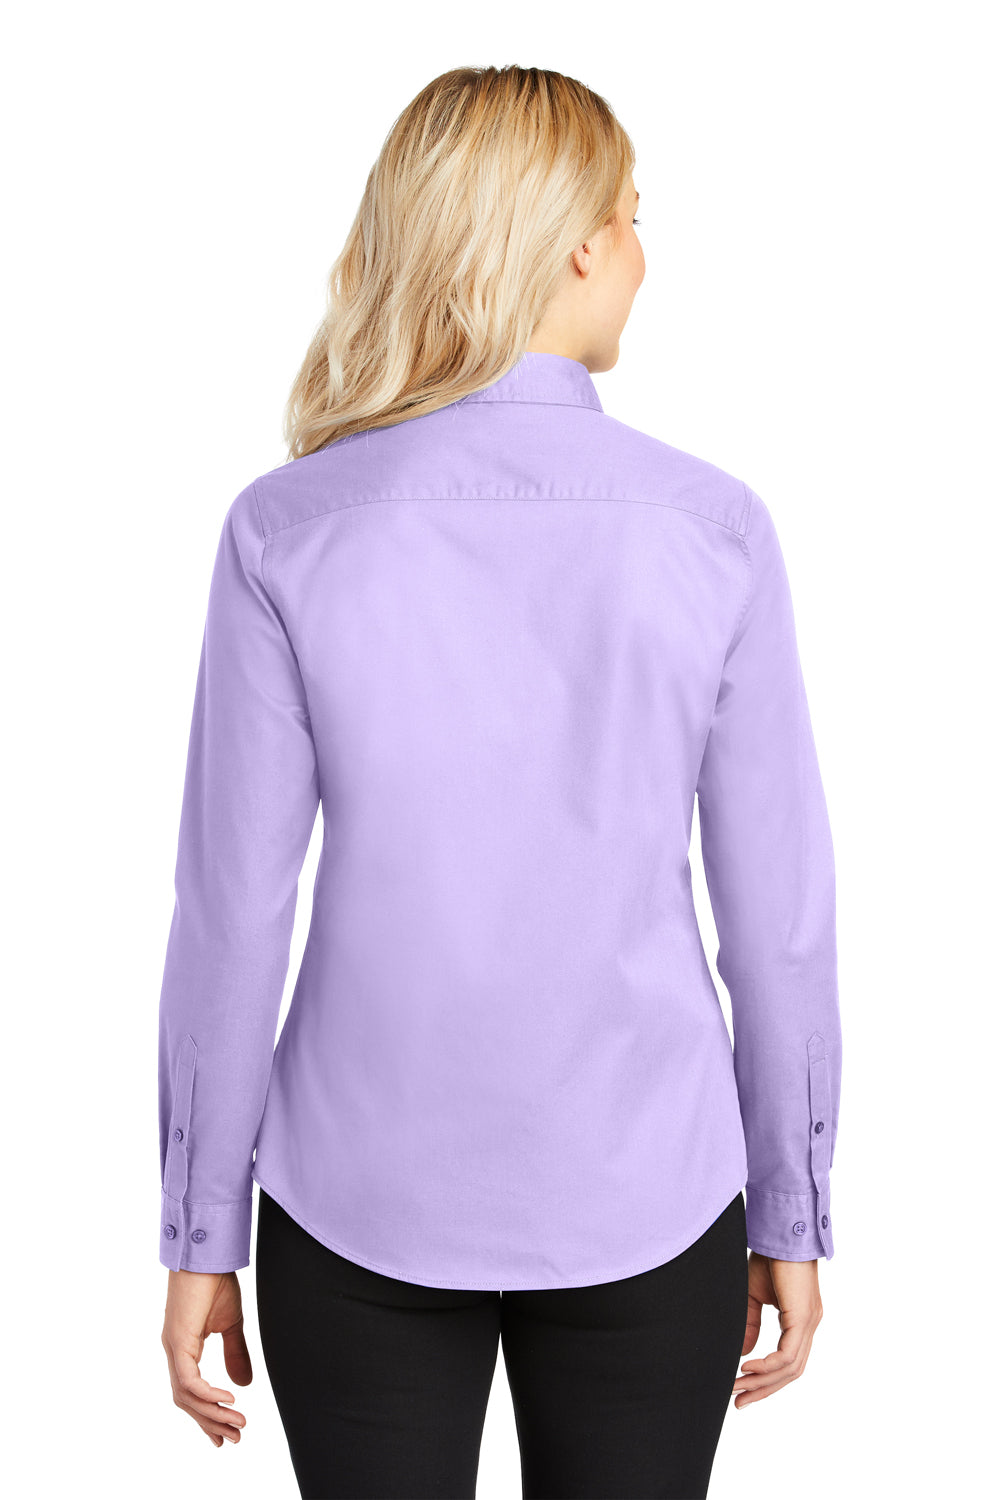 Port Authority L608 Womens Easy Care Wrinkle Resistant Long Sleeve Button Down Shirt Bright Lavender Purple Back